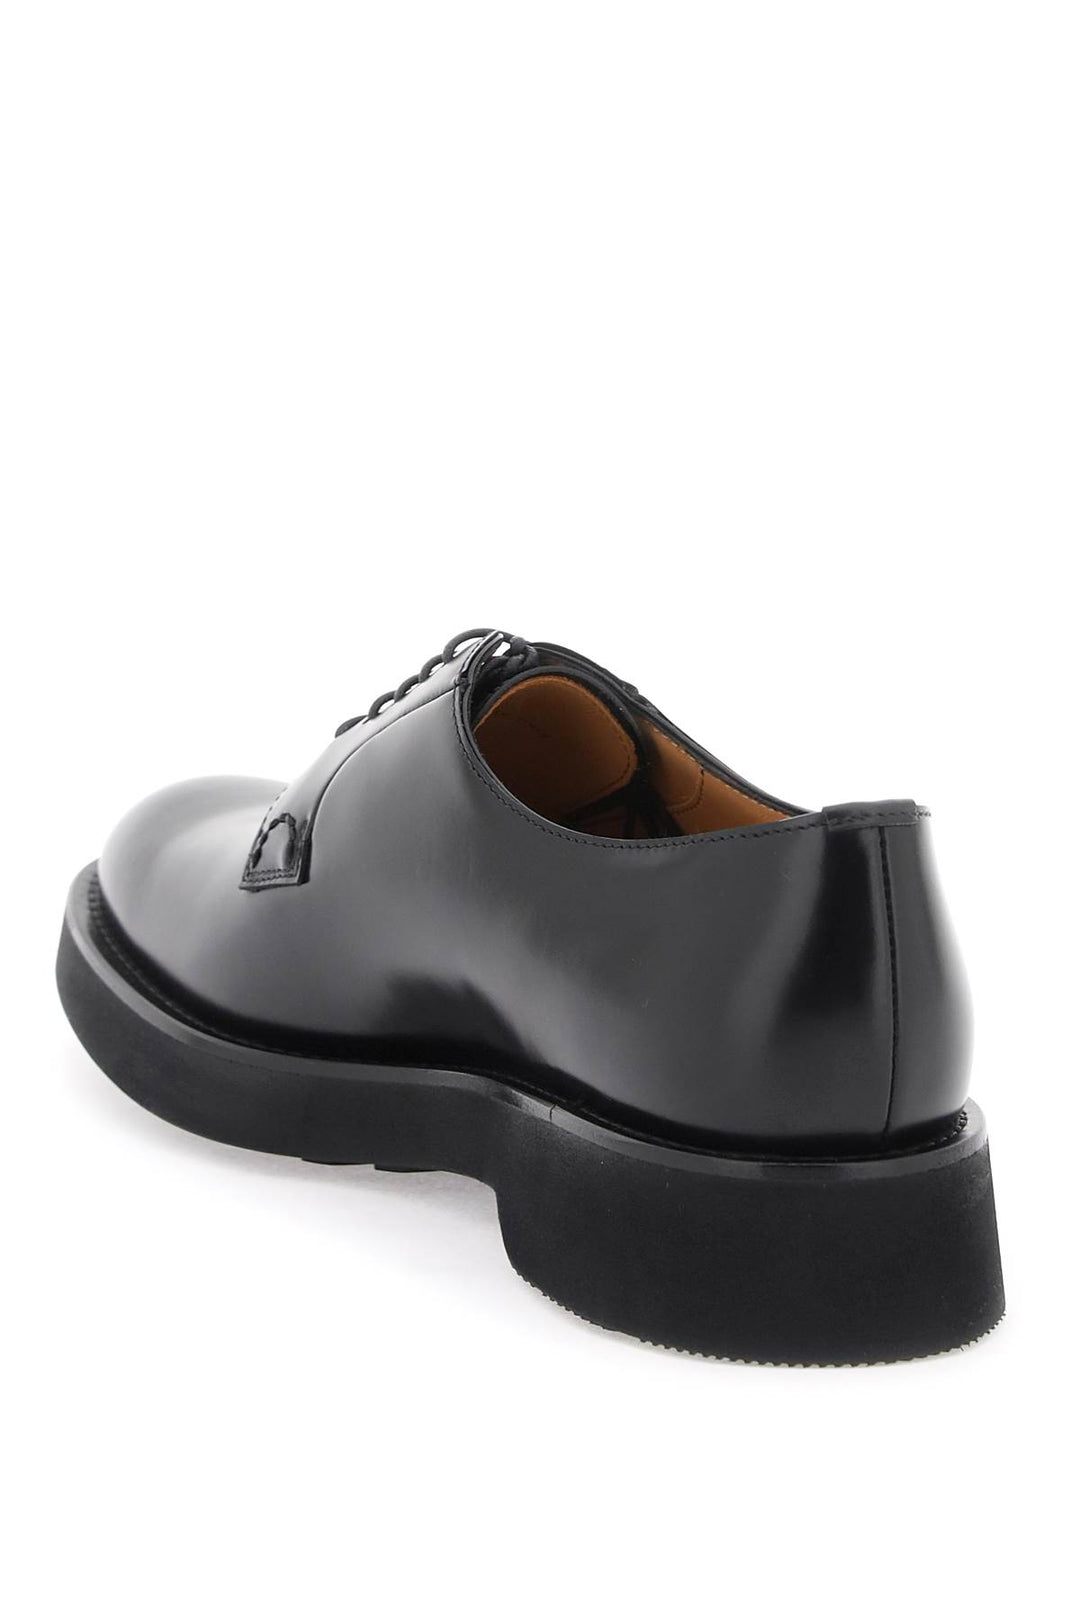 Church's Leather Shannon Derby Shoes   Nero